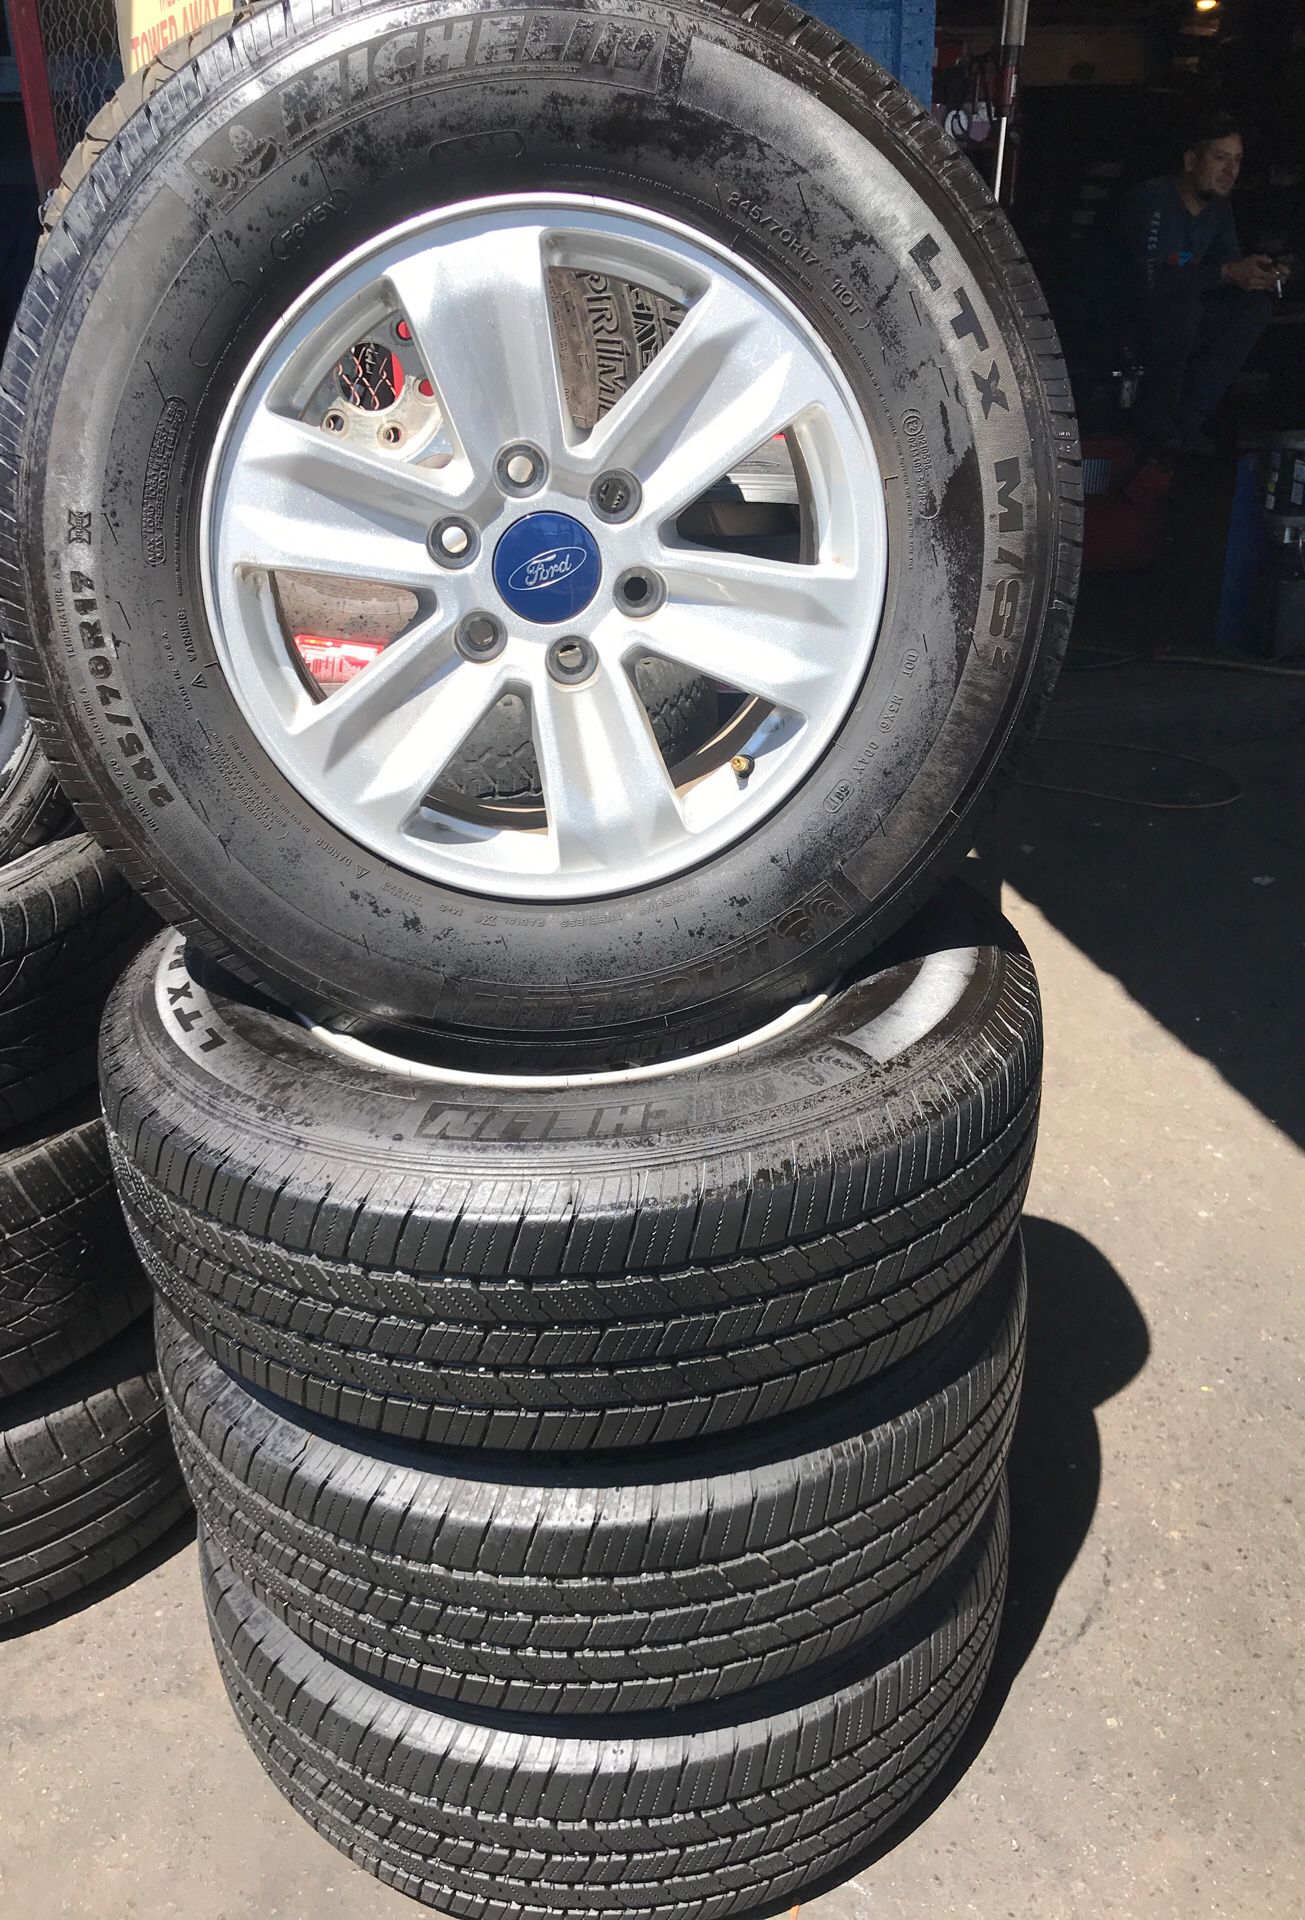 Rims and Michelin tires! Sizes 245/70/17